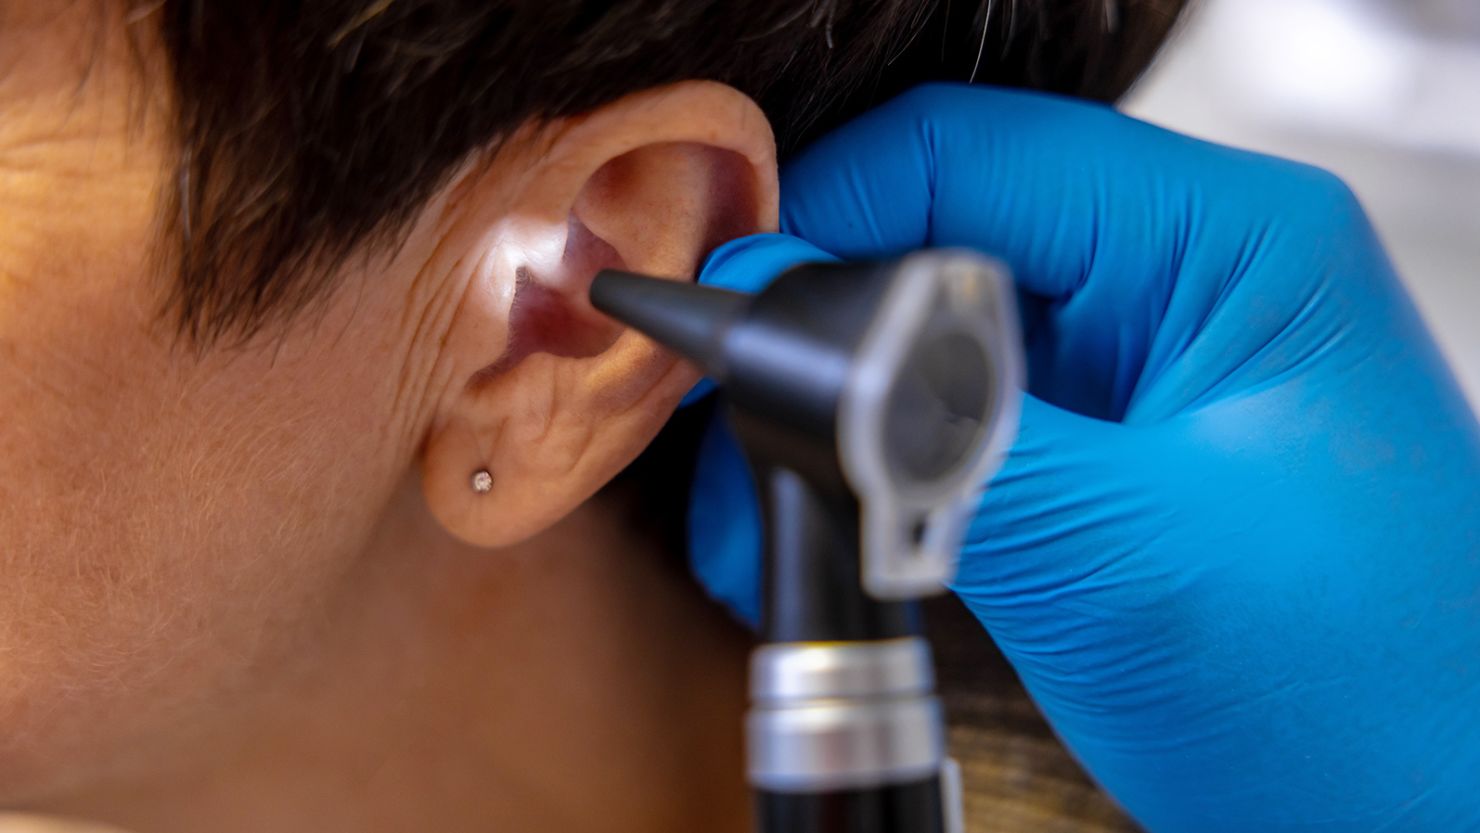 Hearing aids without a prescription could make them more accessible, experts said.